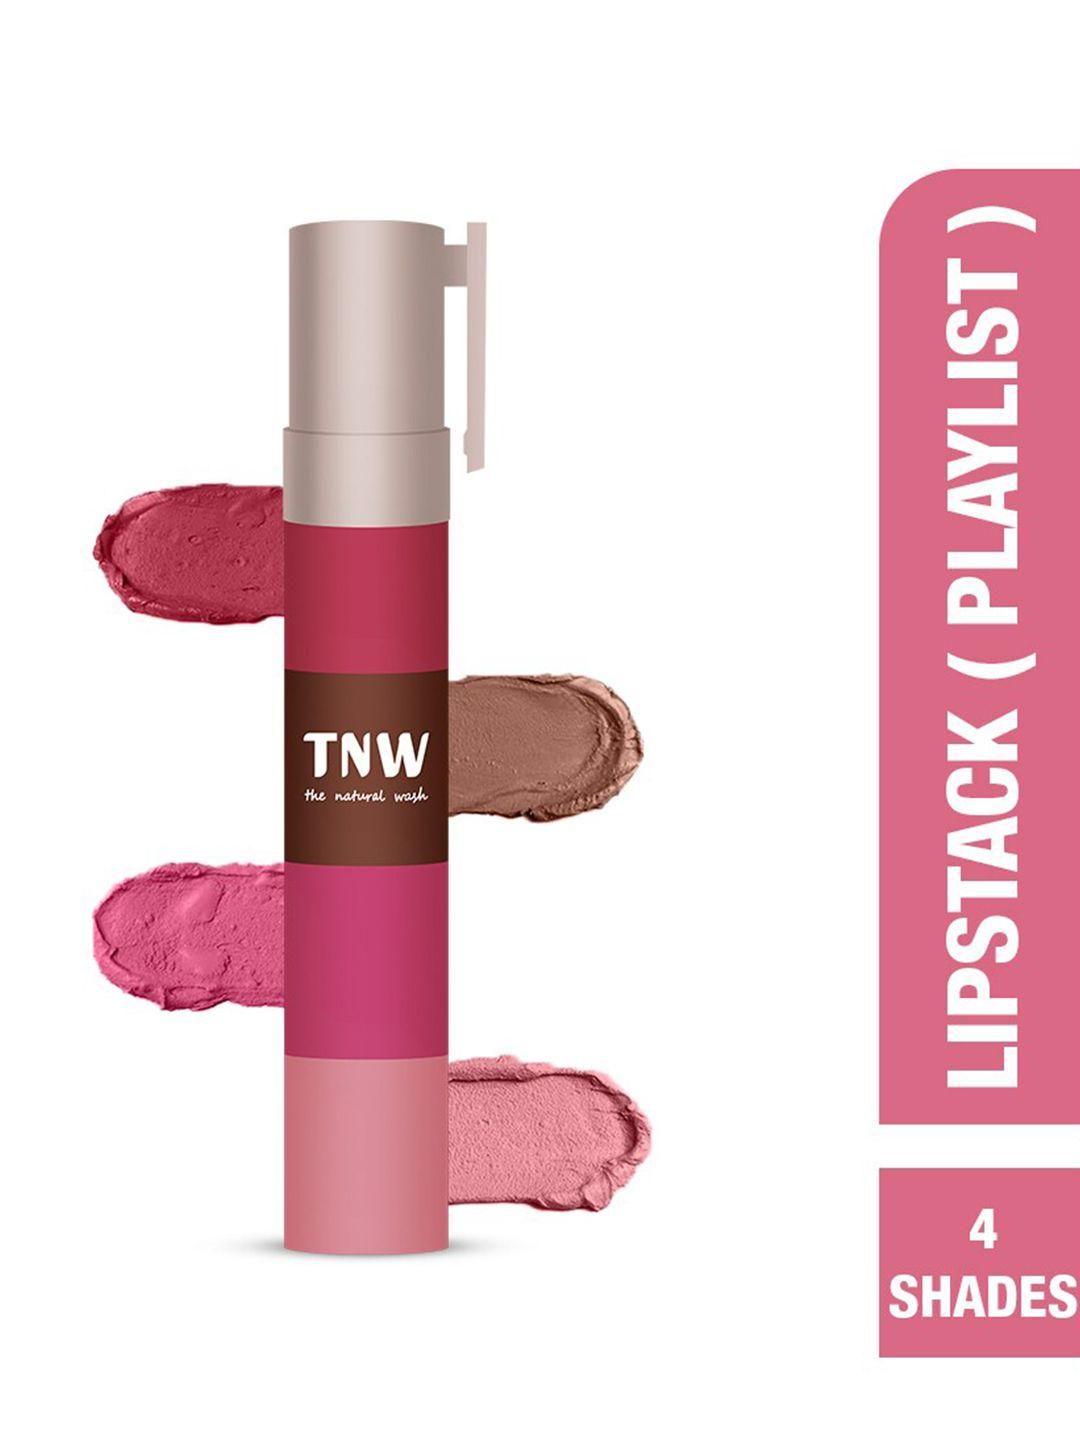 tnw the natural wash 4 in 1 stack up your shade lipstick 6.4g - playlist 01